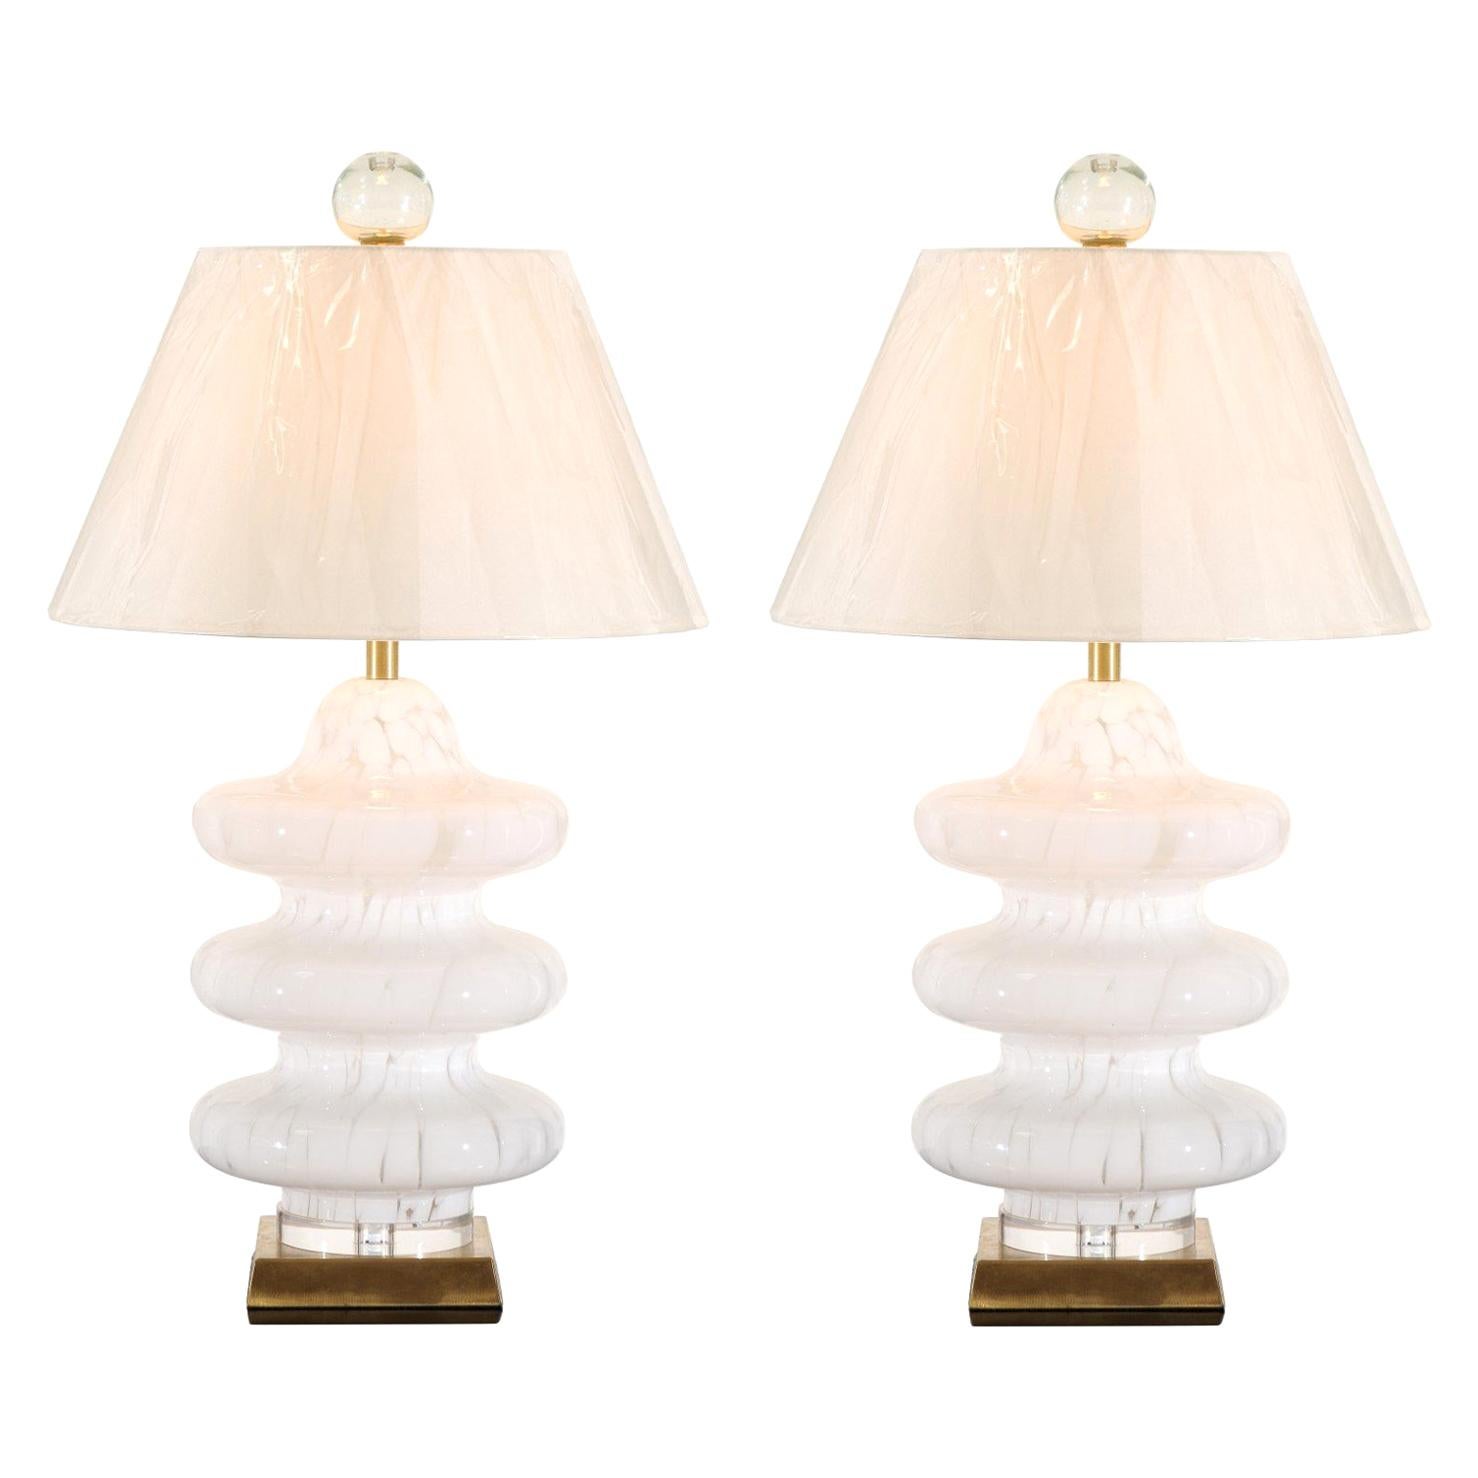 Exquisite Restored Blown Glass Three-Tired Pagoda Style Murano Lamps by Mazzega